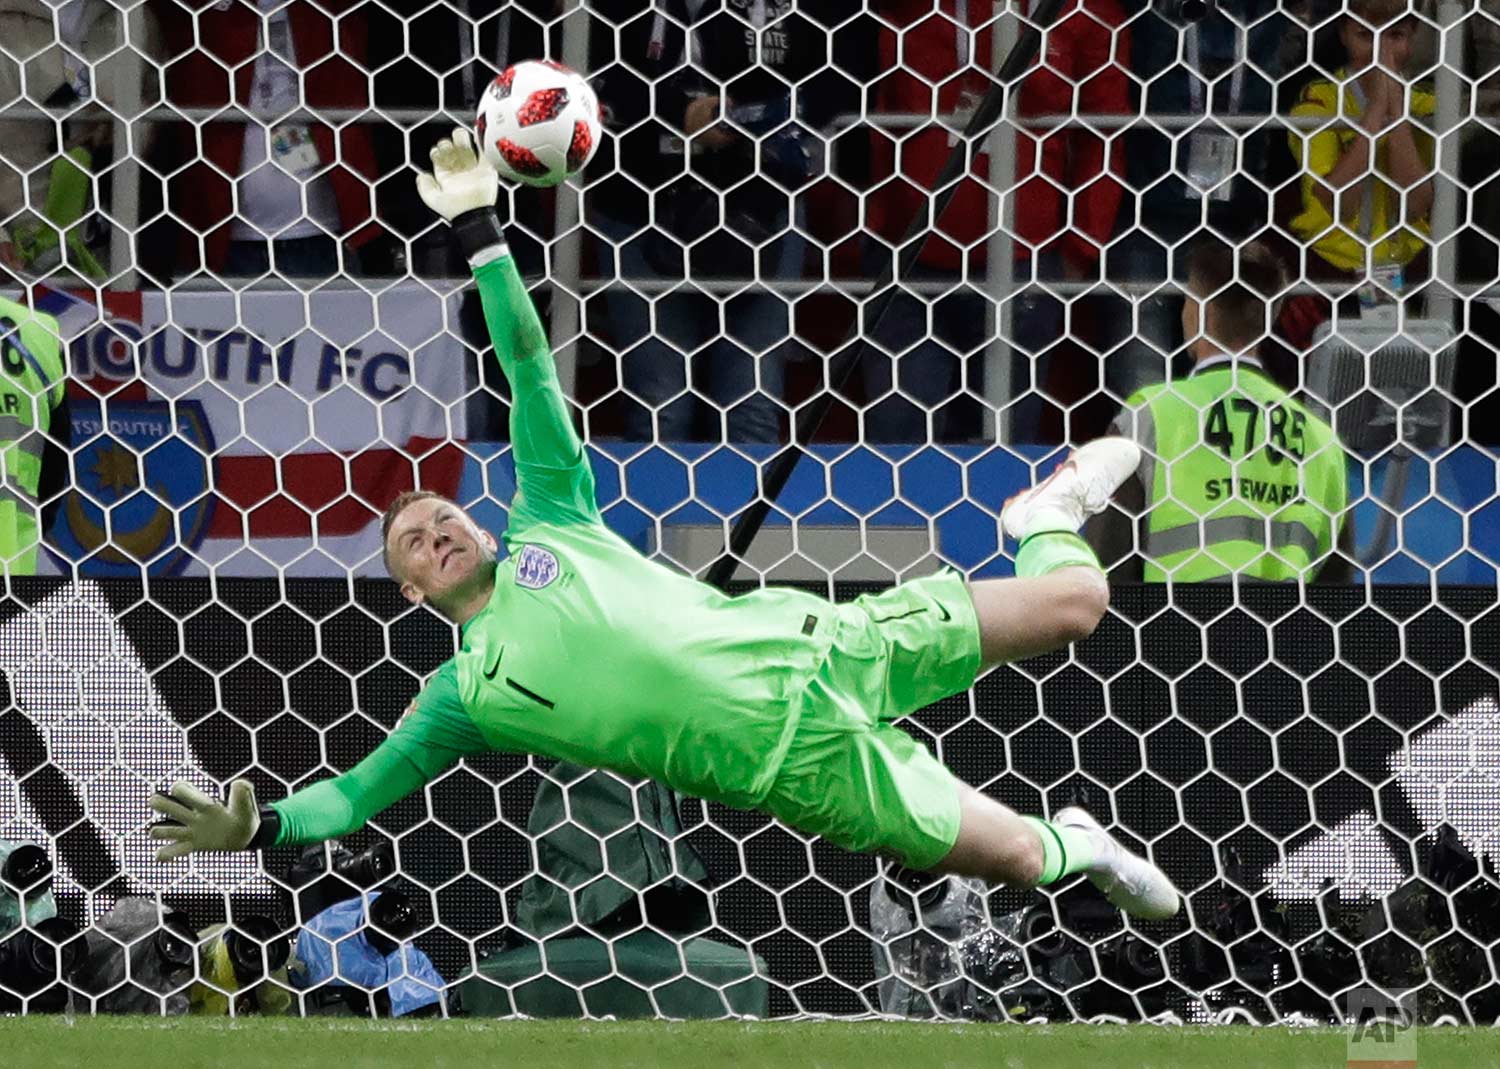  England goalkeeper Jordan Pickford saves a penalty during the round of 16 match between Colombia and England at the 2018 soccer World Cup in the Spartak Stadium, in Moscow, Russia, Tuesday, July 3, 2018. (AP Photo/Matthias Schrader) 